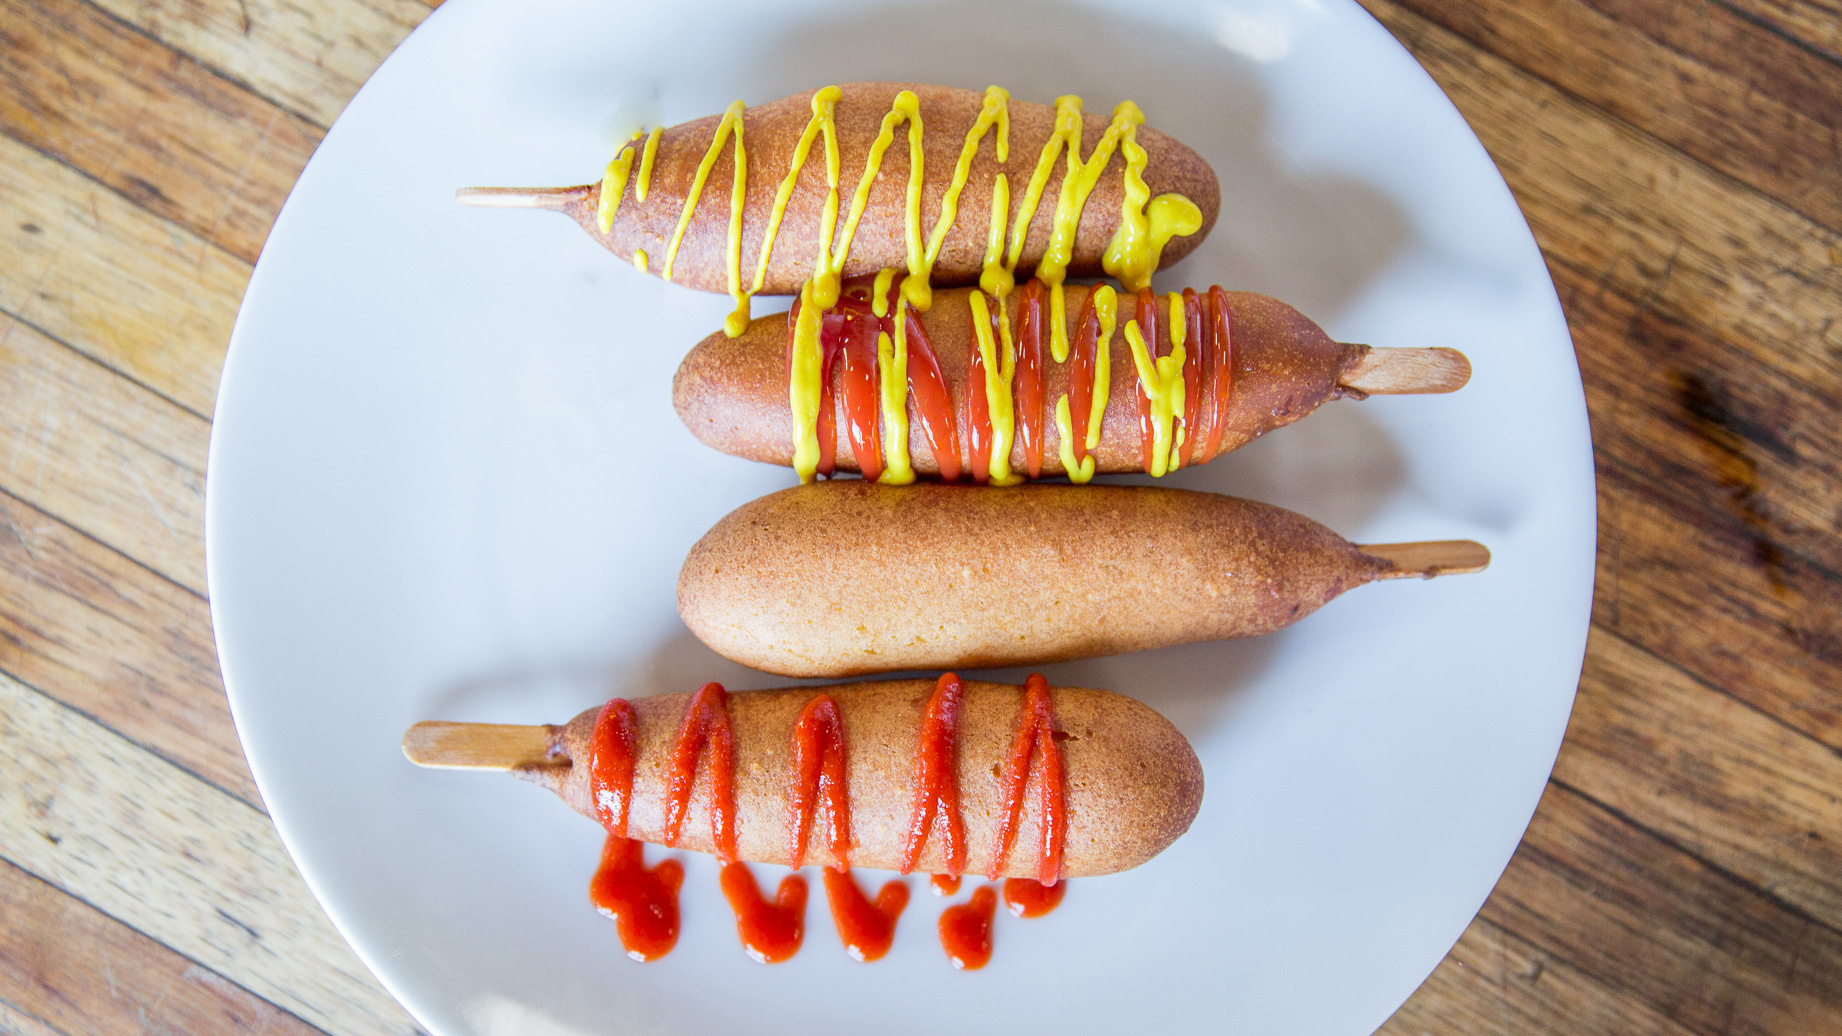 Homemade Corn Dogs Recipe Chefsteps